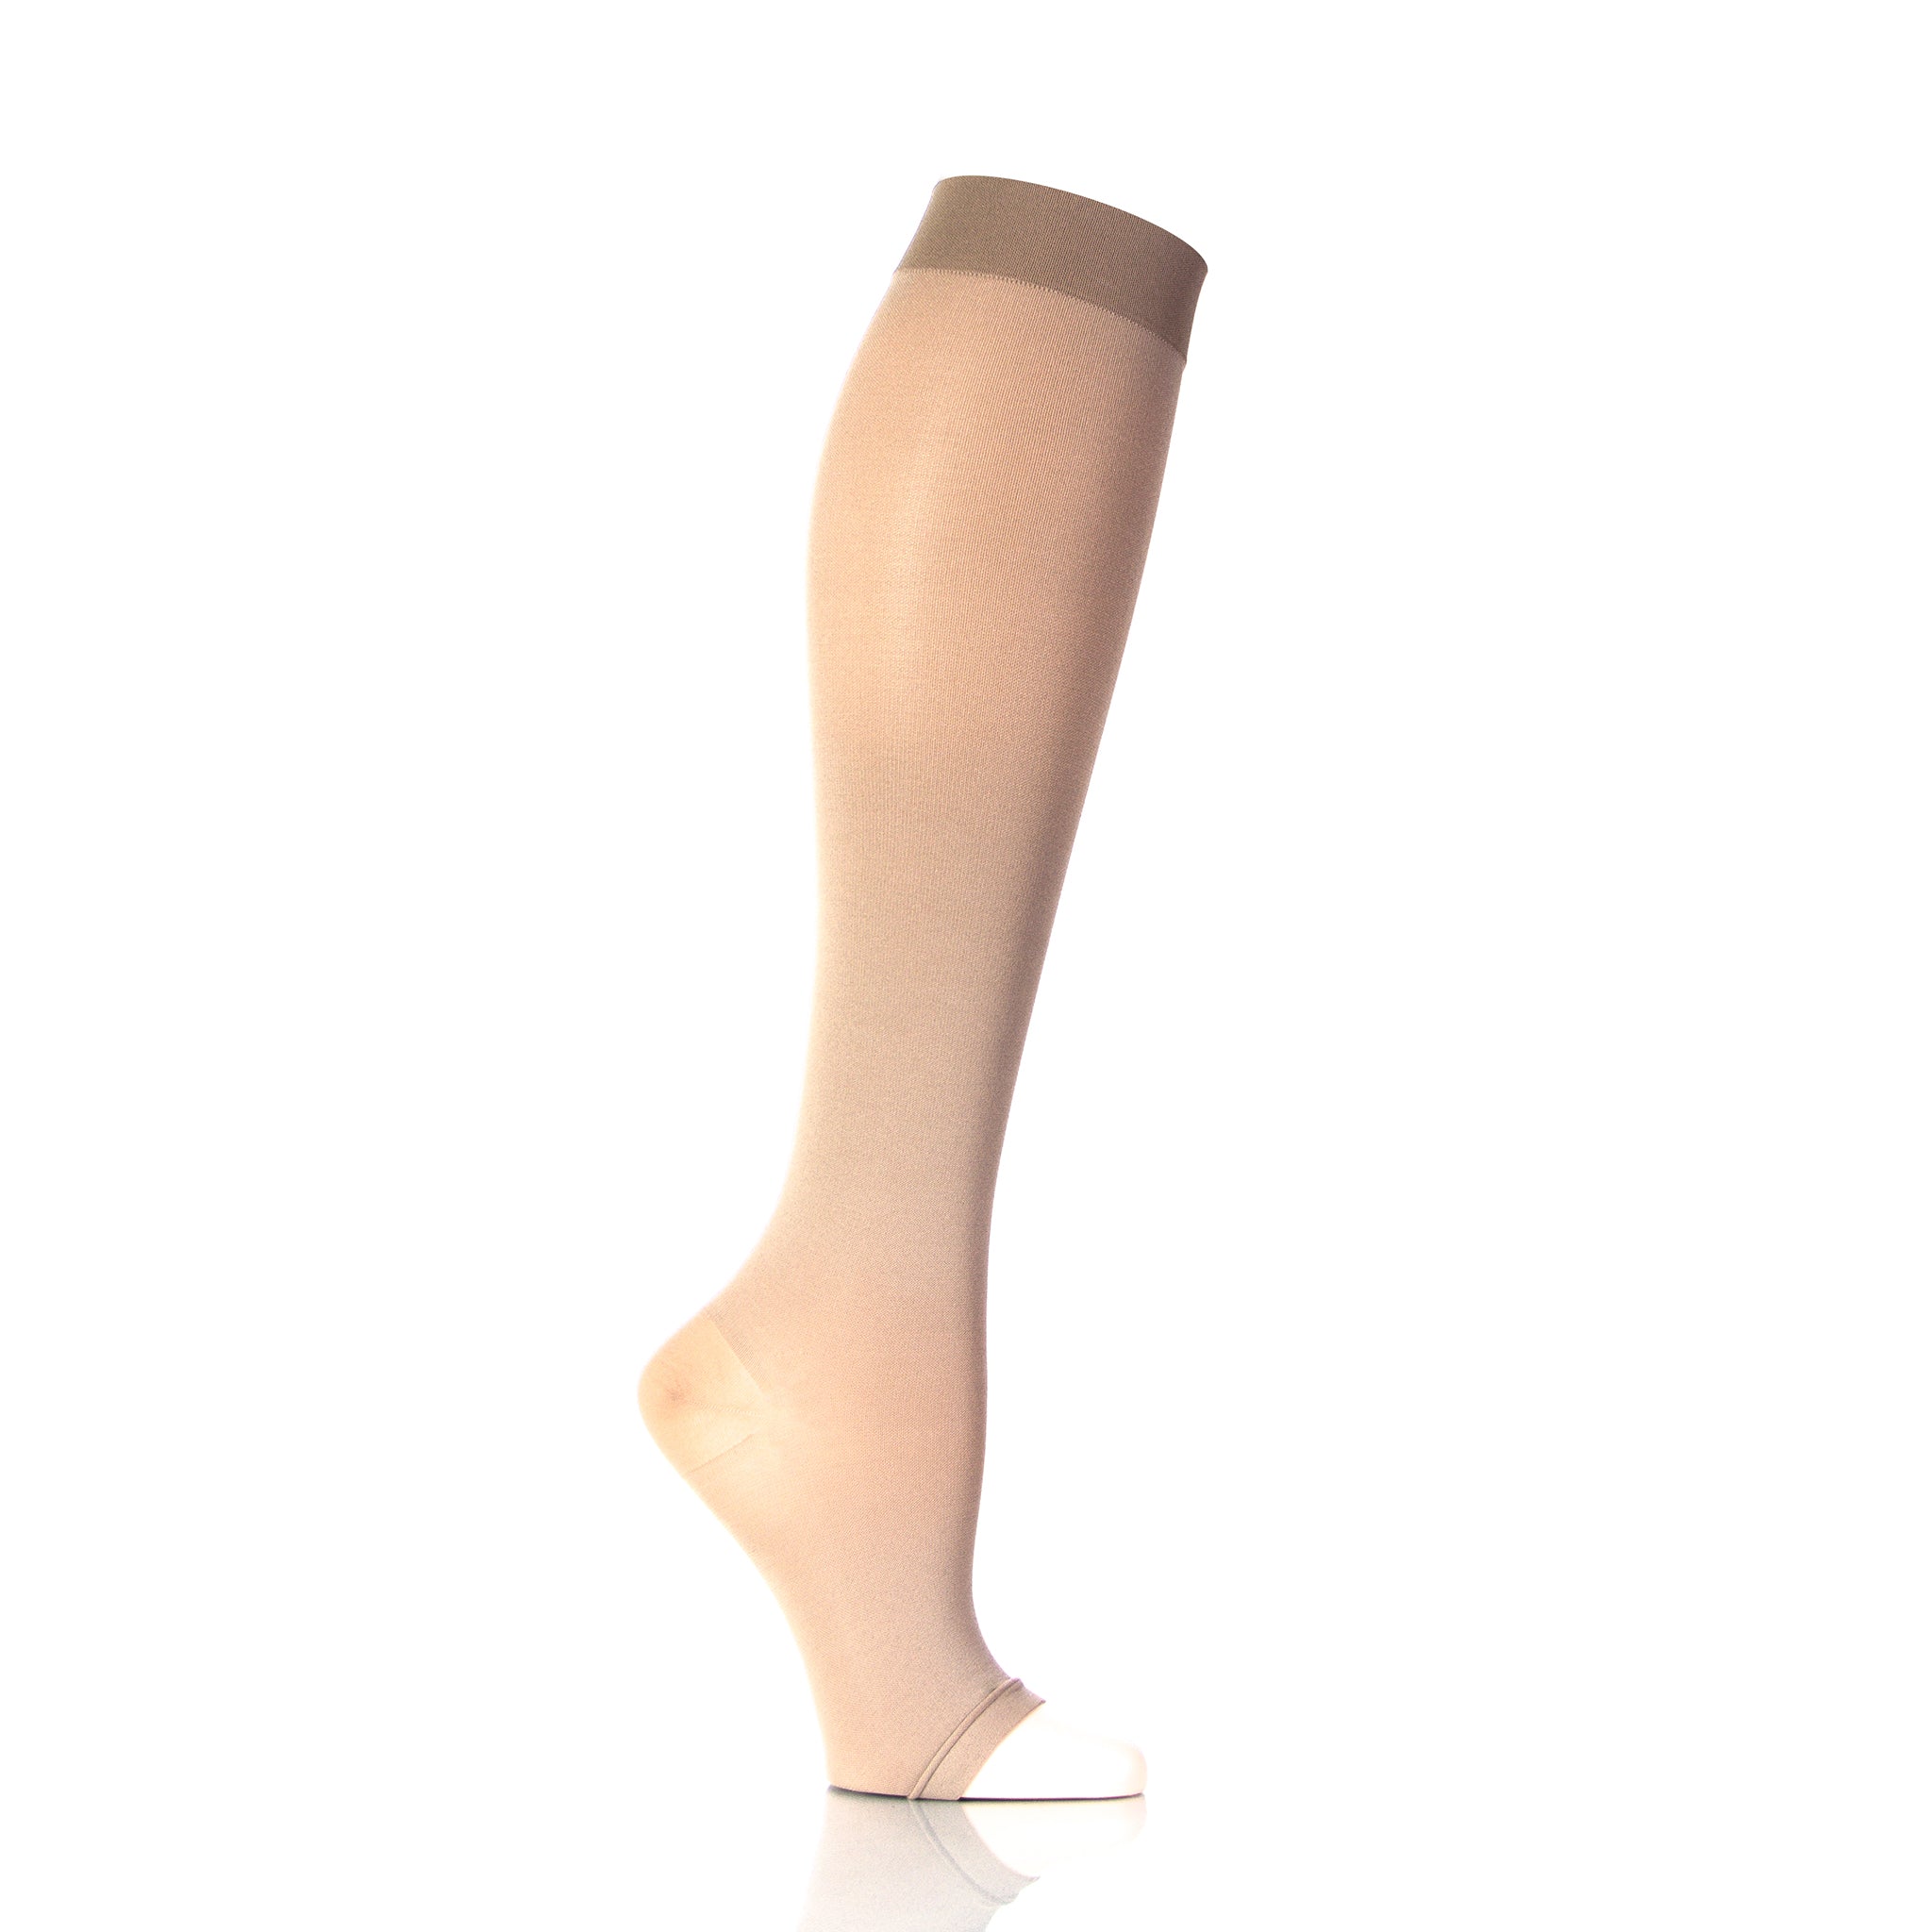 Compression stockings ineffective in treating Deep Vein Thrombosis: study